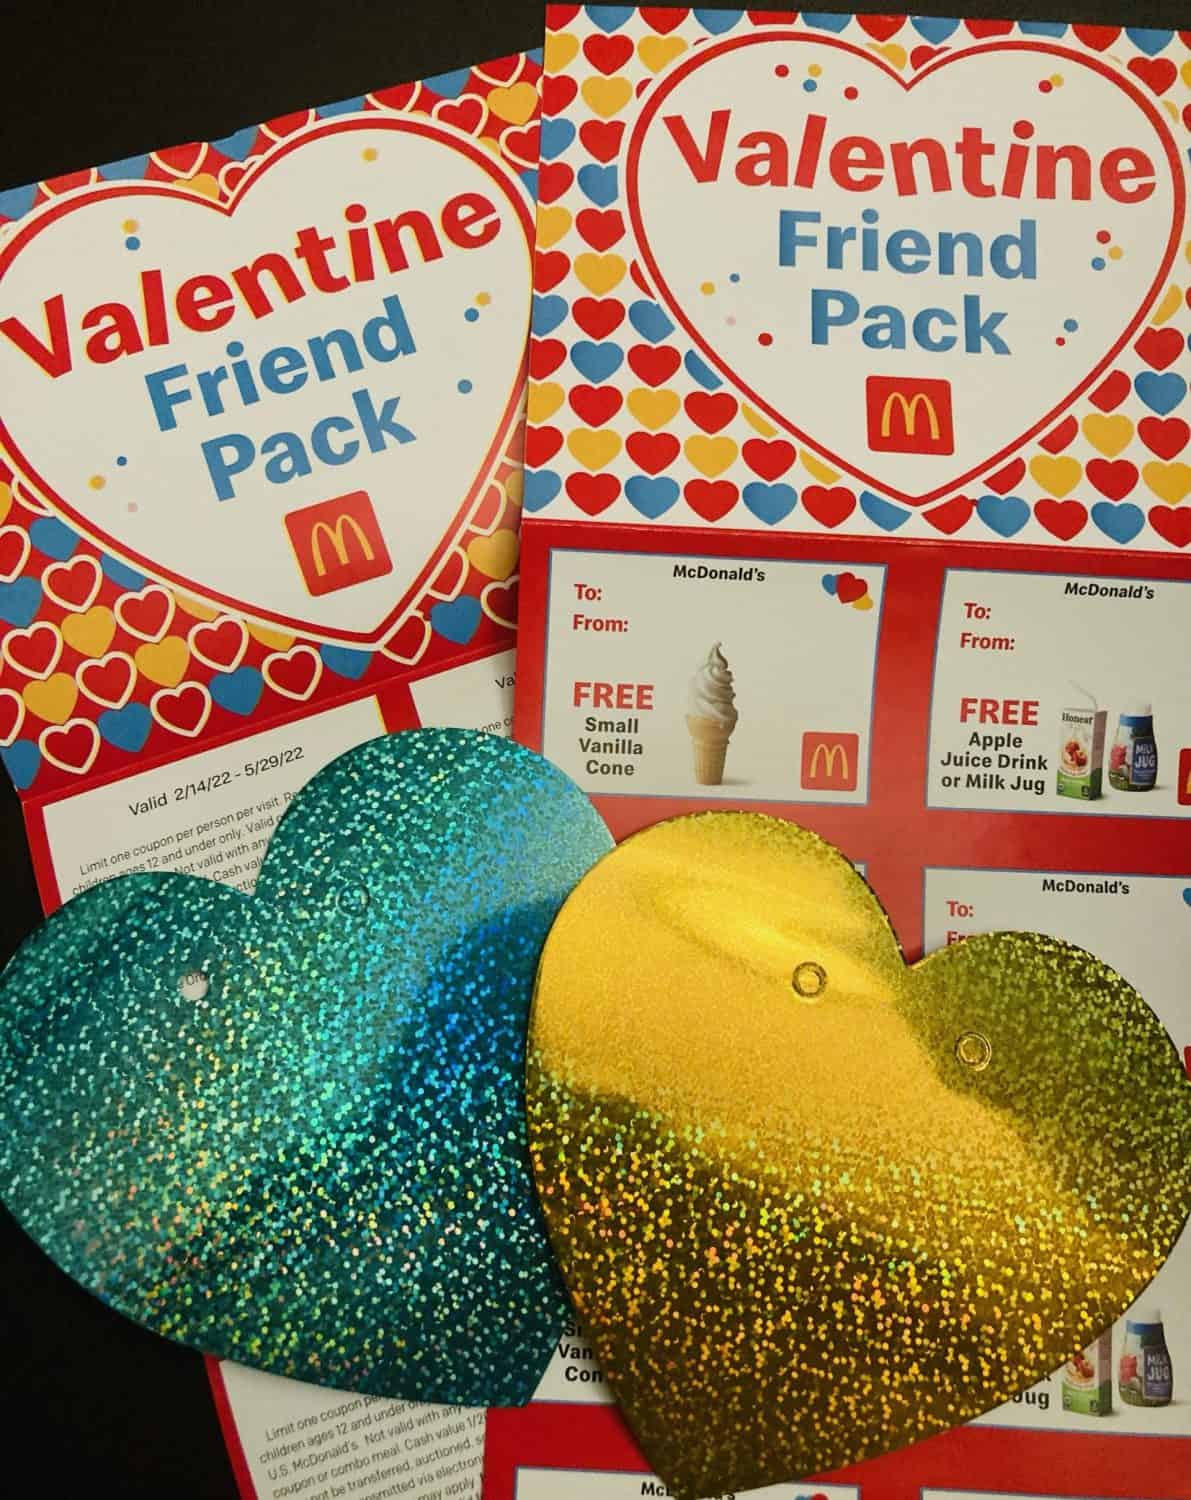 McDonald's 1 Valentine Friend Pack Includes 12 Coupons for Freebies